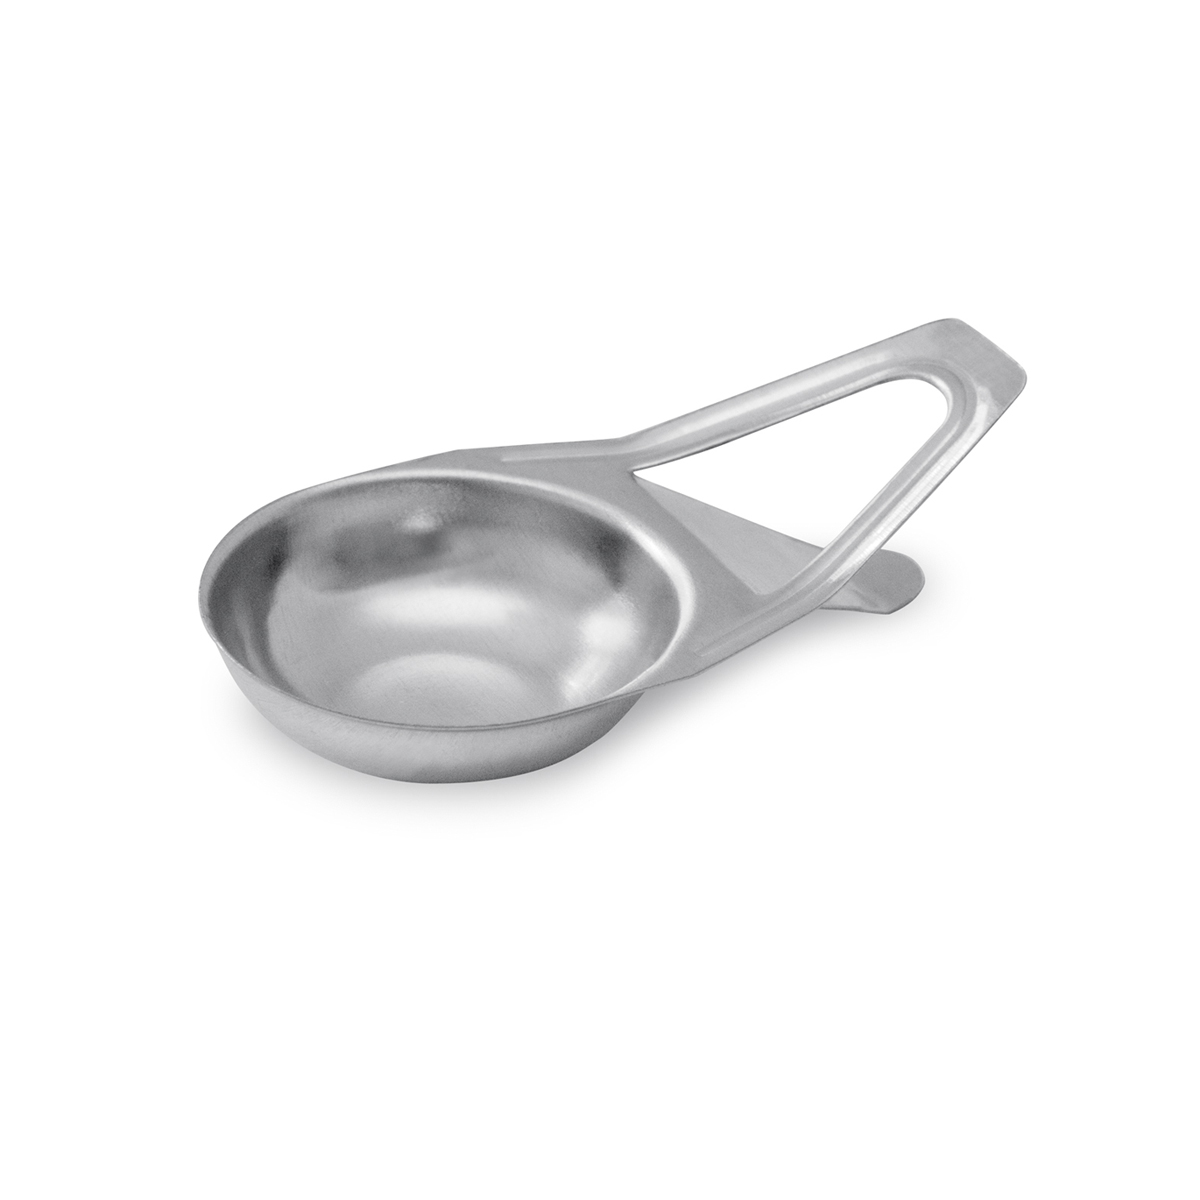 Orion spoon (Discontinued)